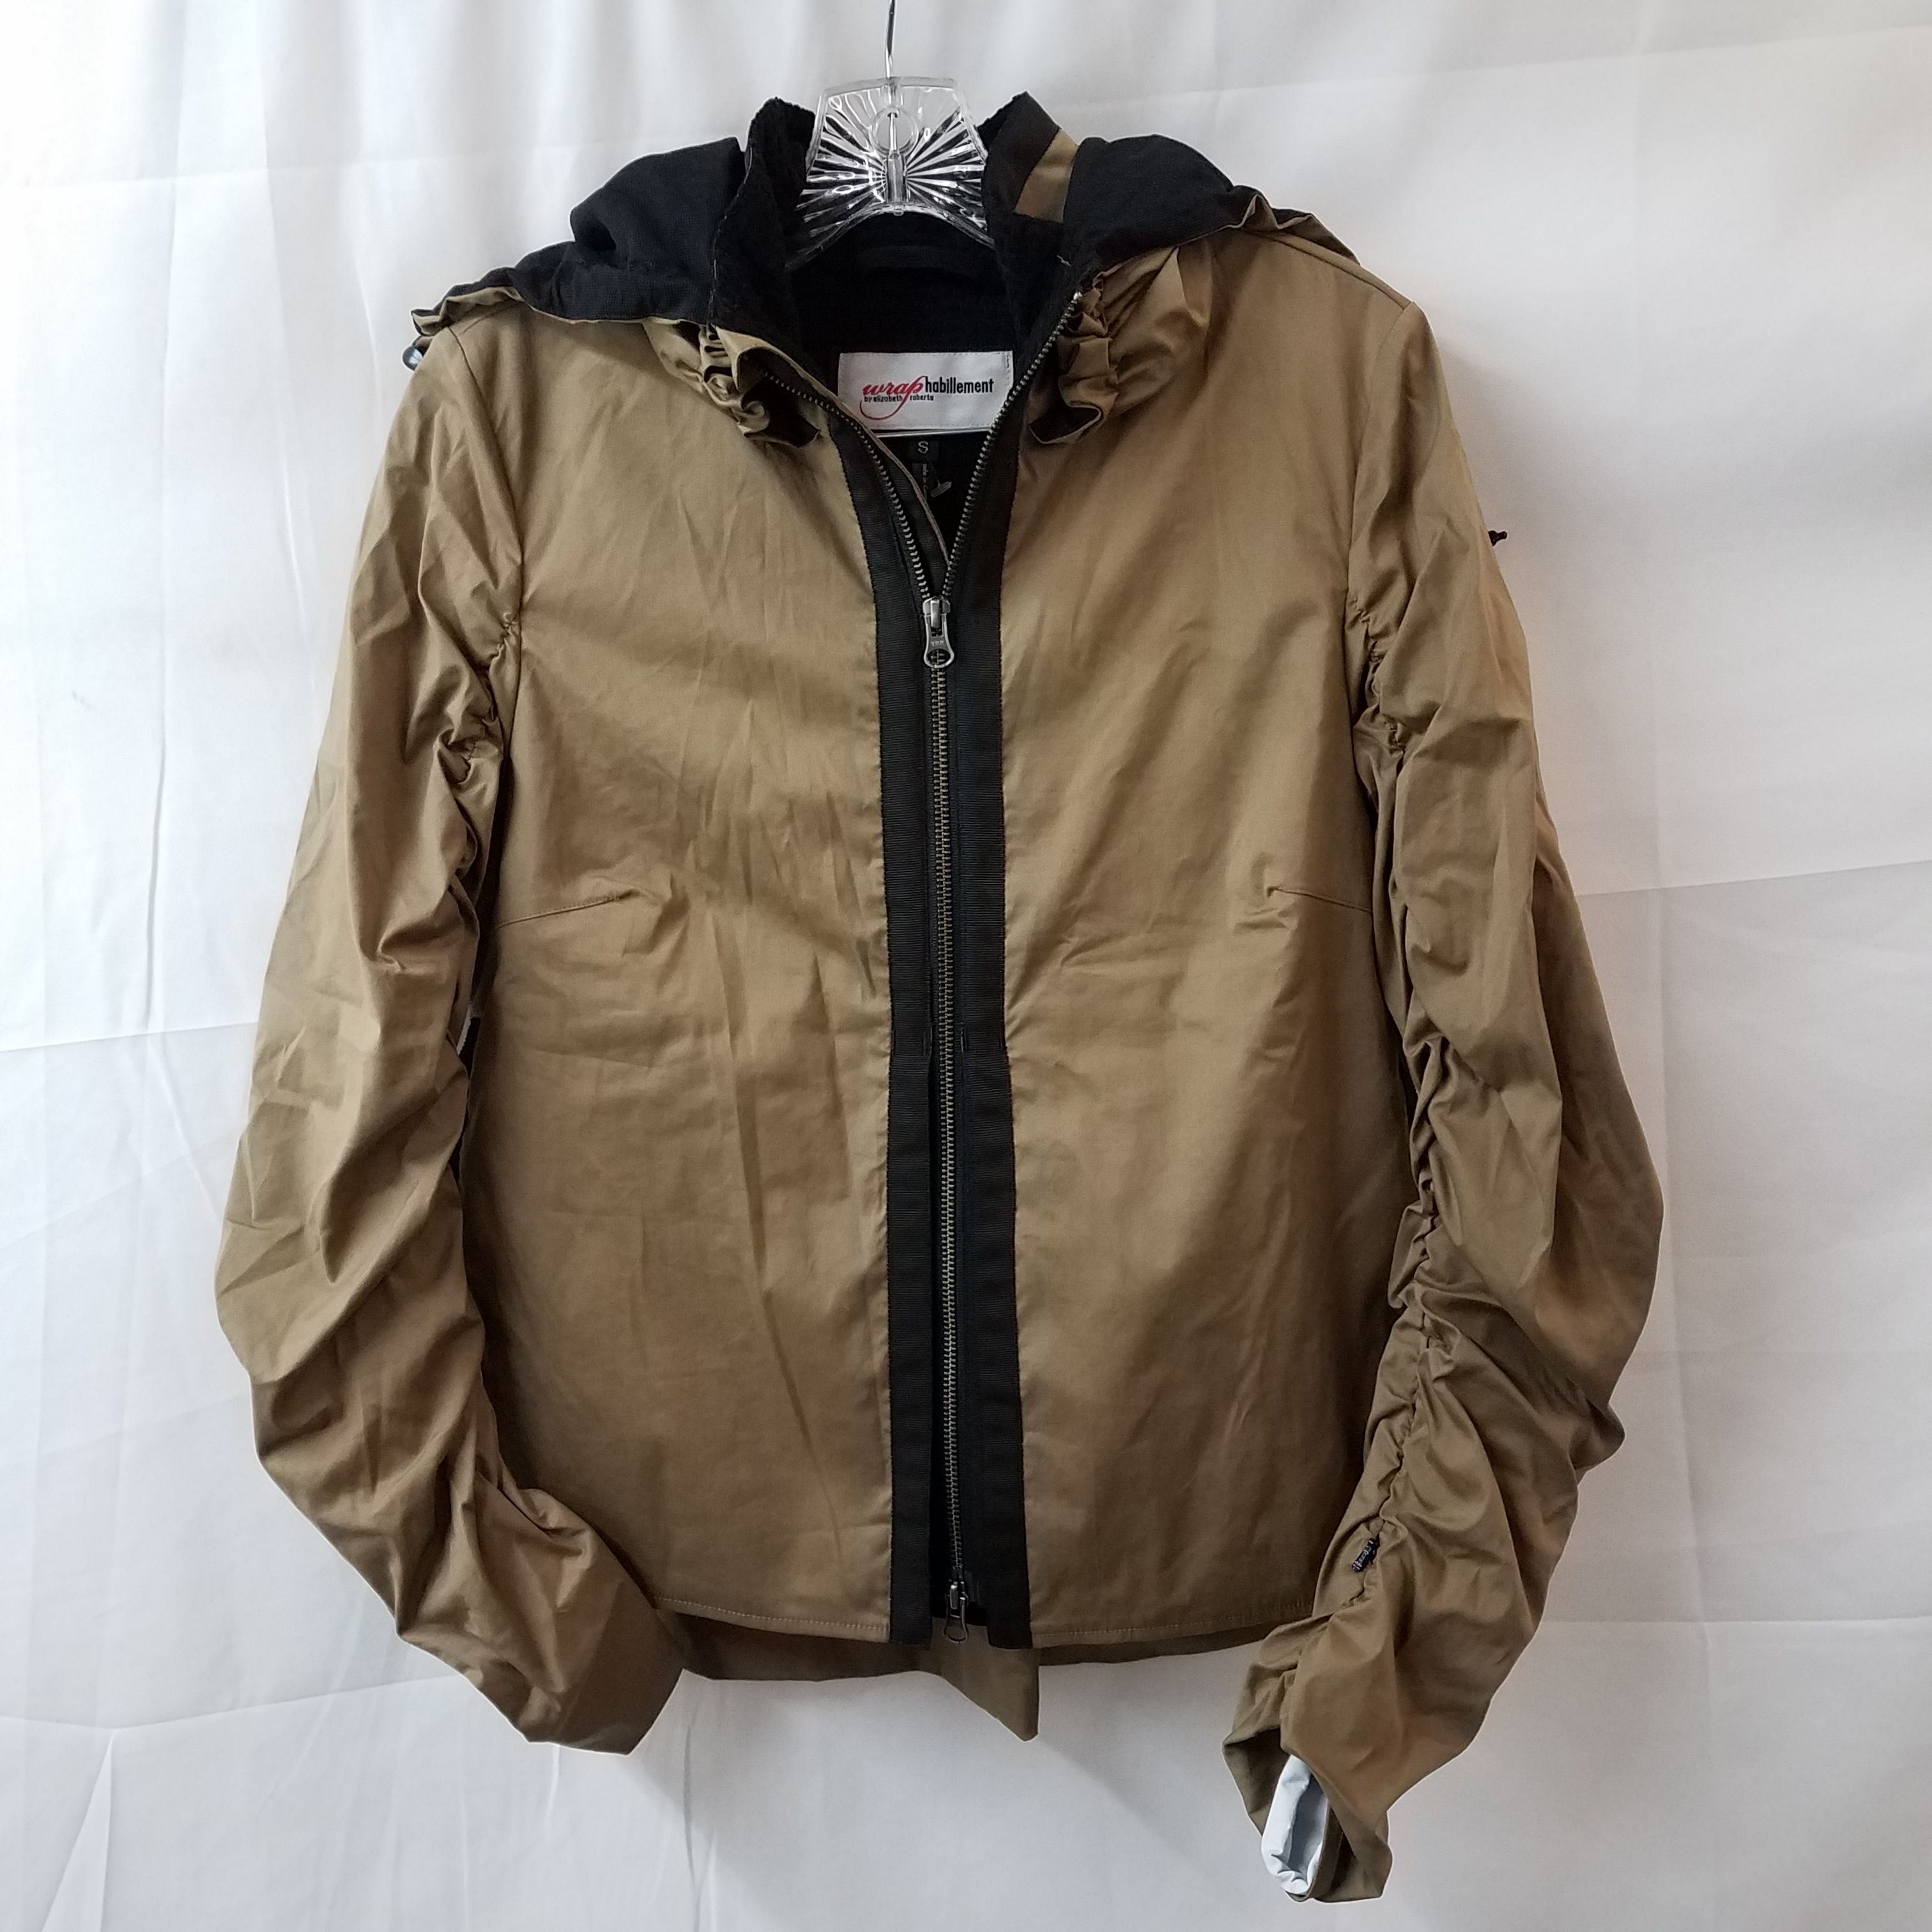 Buy the Wrap Habiliment Brown Rain Jacket | GoodwillFinds